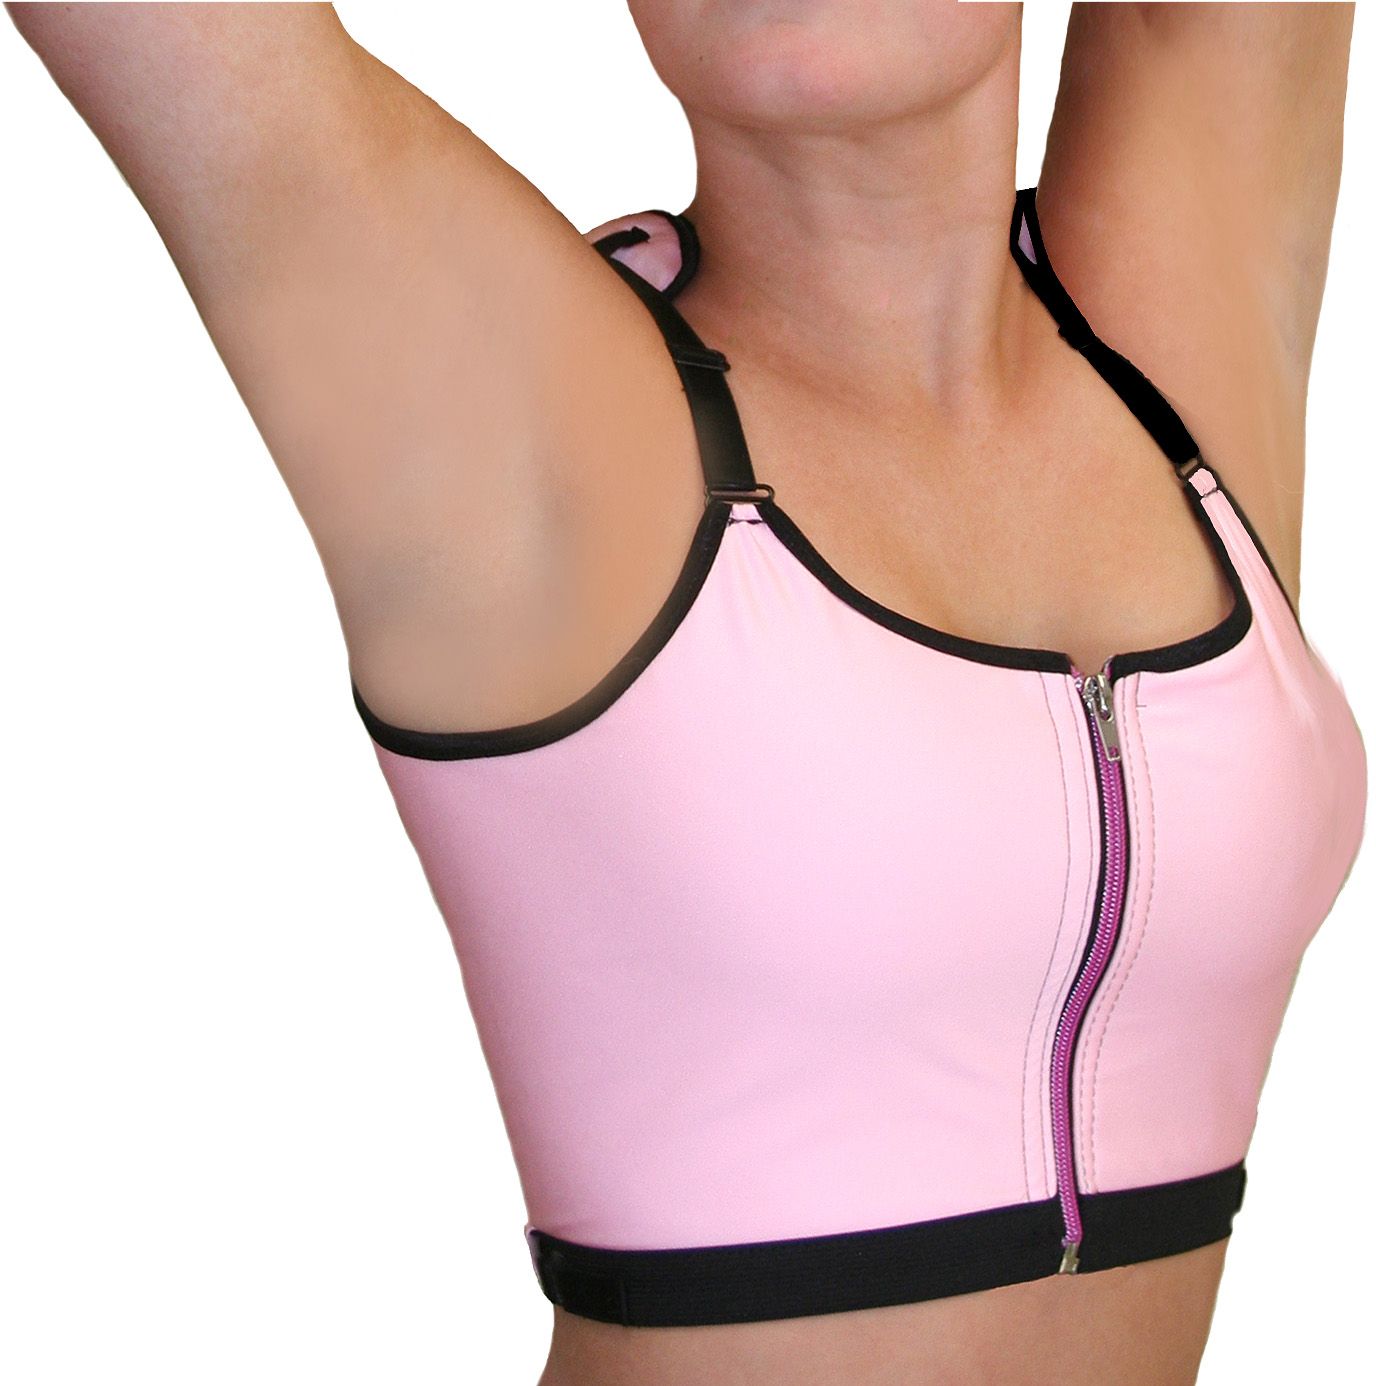 The Intuition Recovery Bra - A New Concept In Breast Care Recovery!